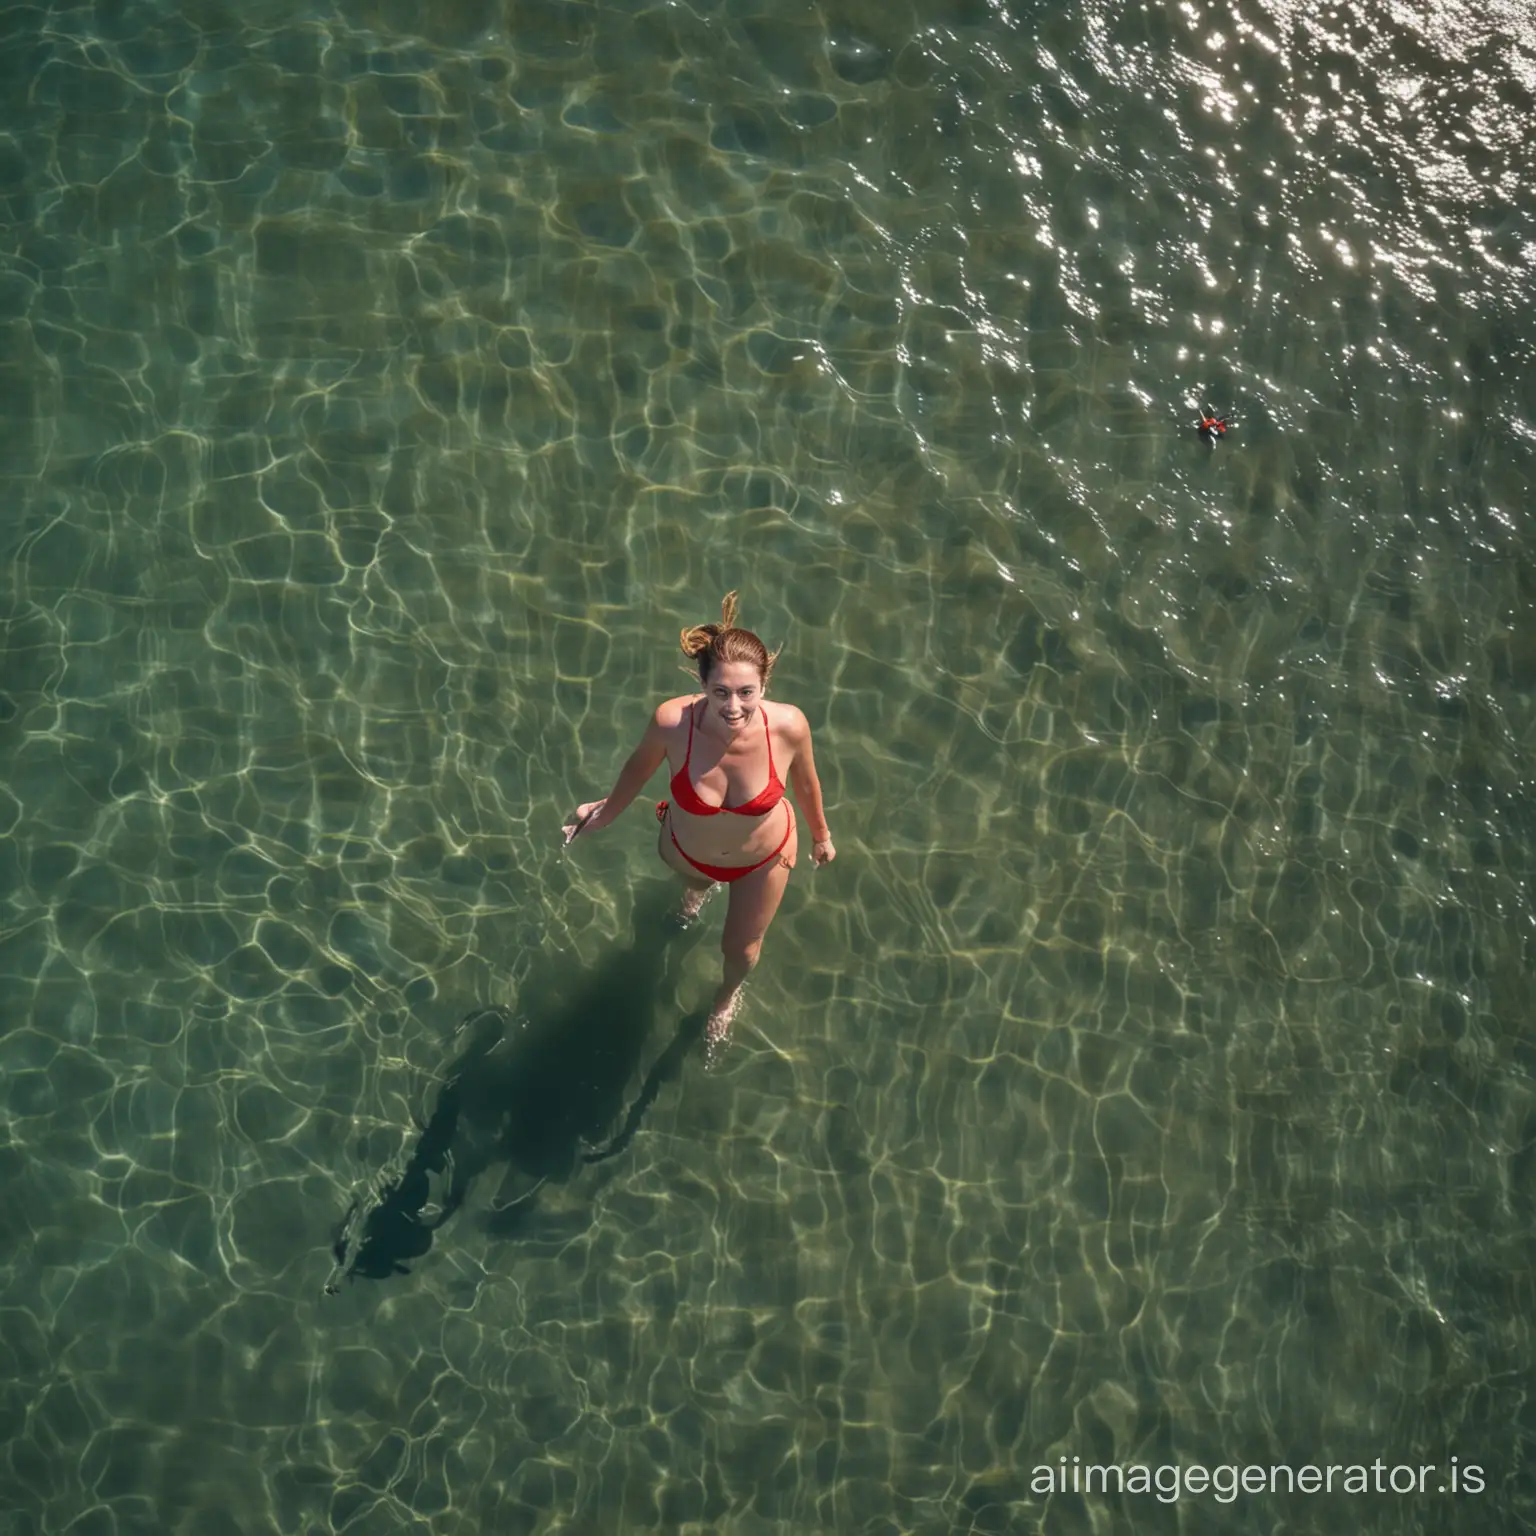 A photo taken from a low-altitude drone of a woman walking in the ocean and looking at the drone's camera; she is wearing a red bikini.